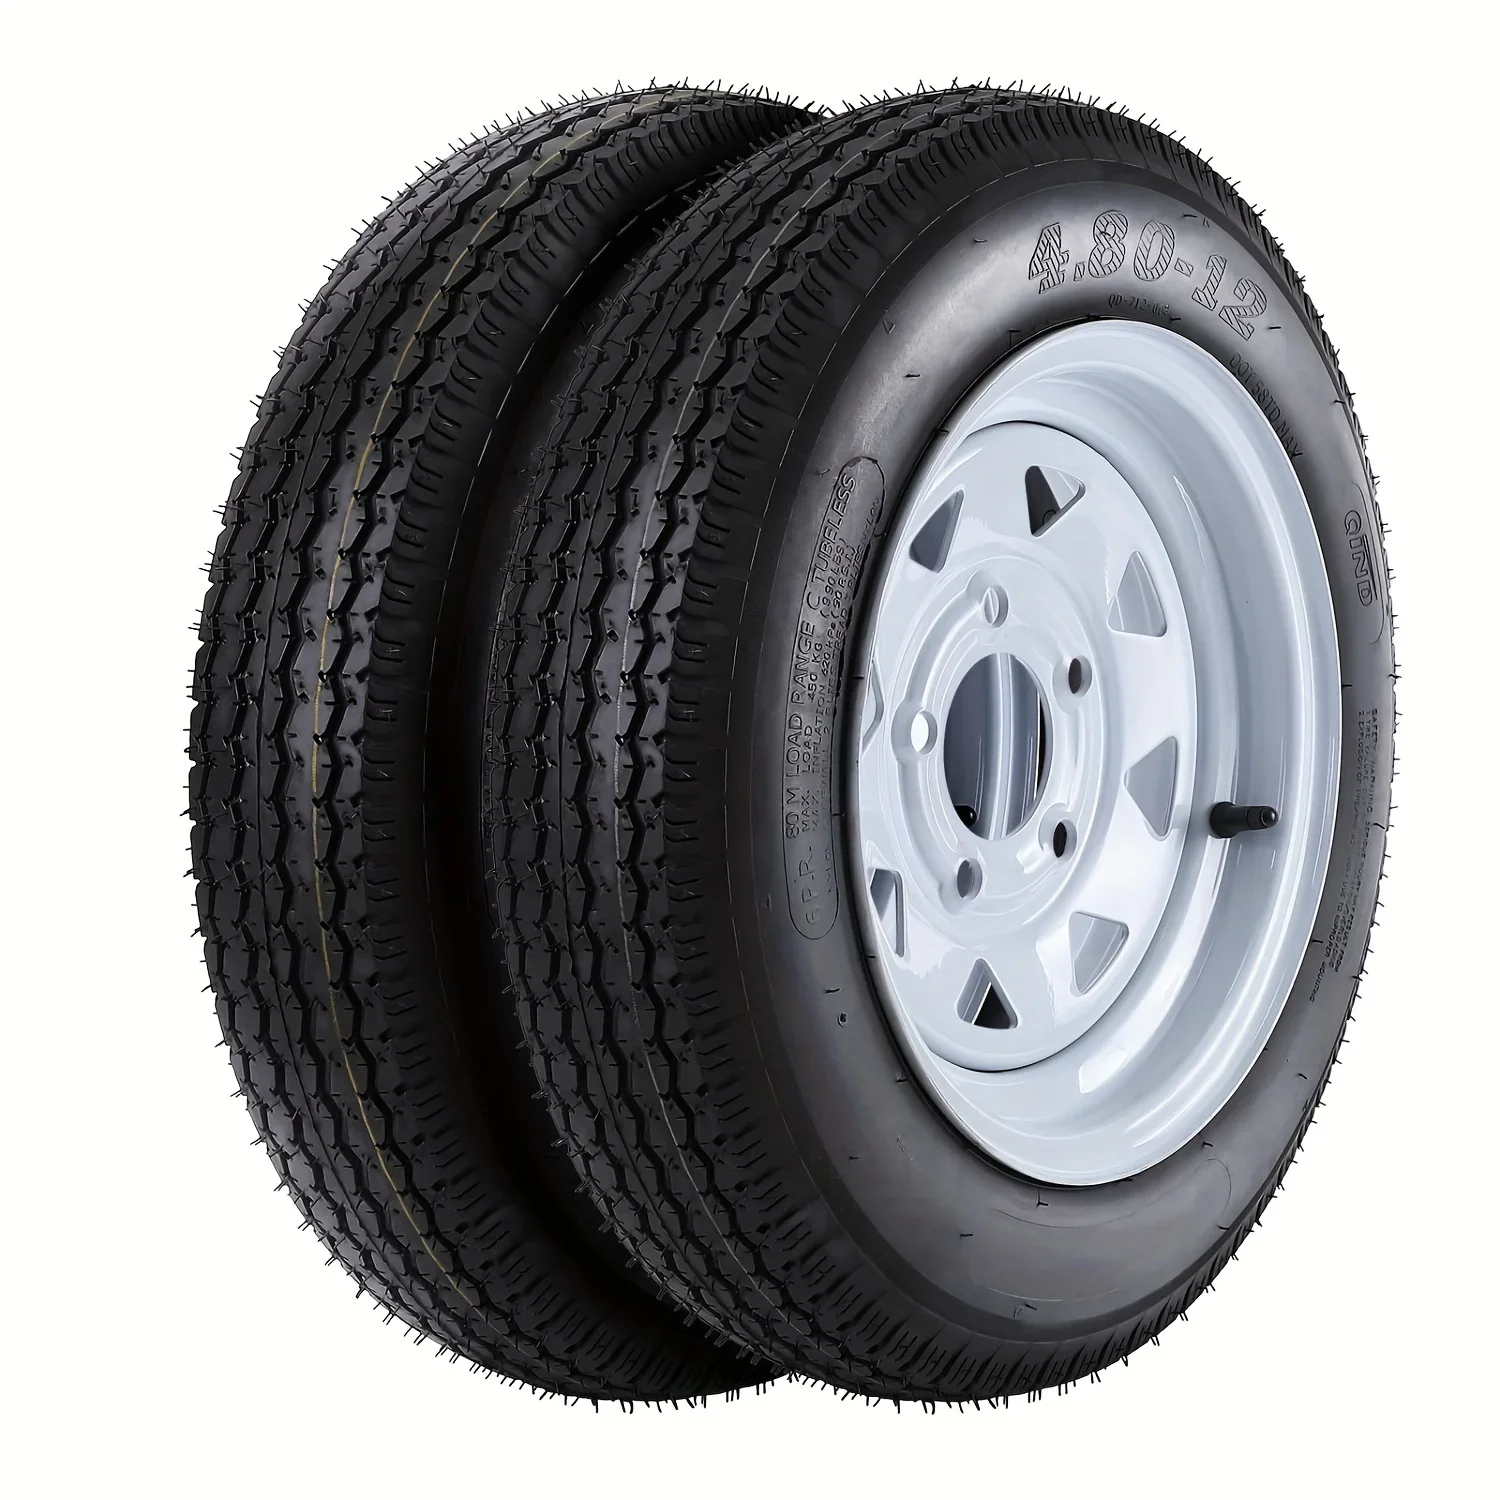 

et of 2 High-quality 4.80-12 Trailer Tires with 12" Rims and 5 Lug on 4.5" Pattern. Durable Load Range C Tires with 990 lbs Capa